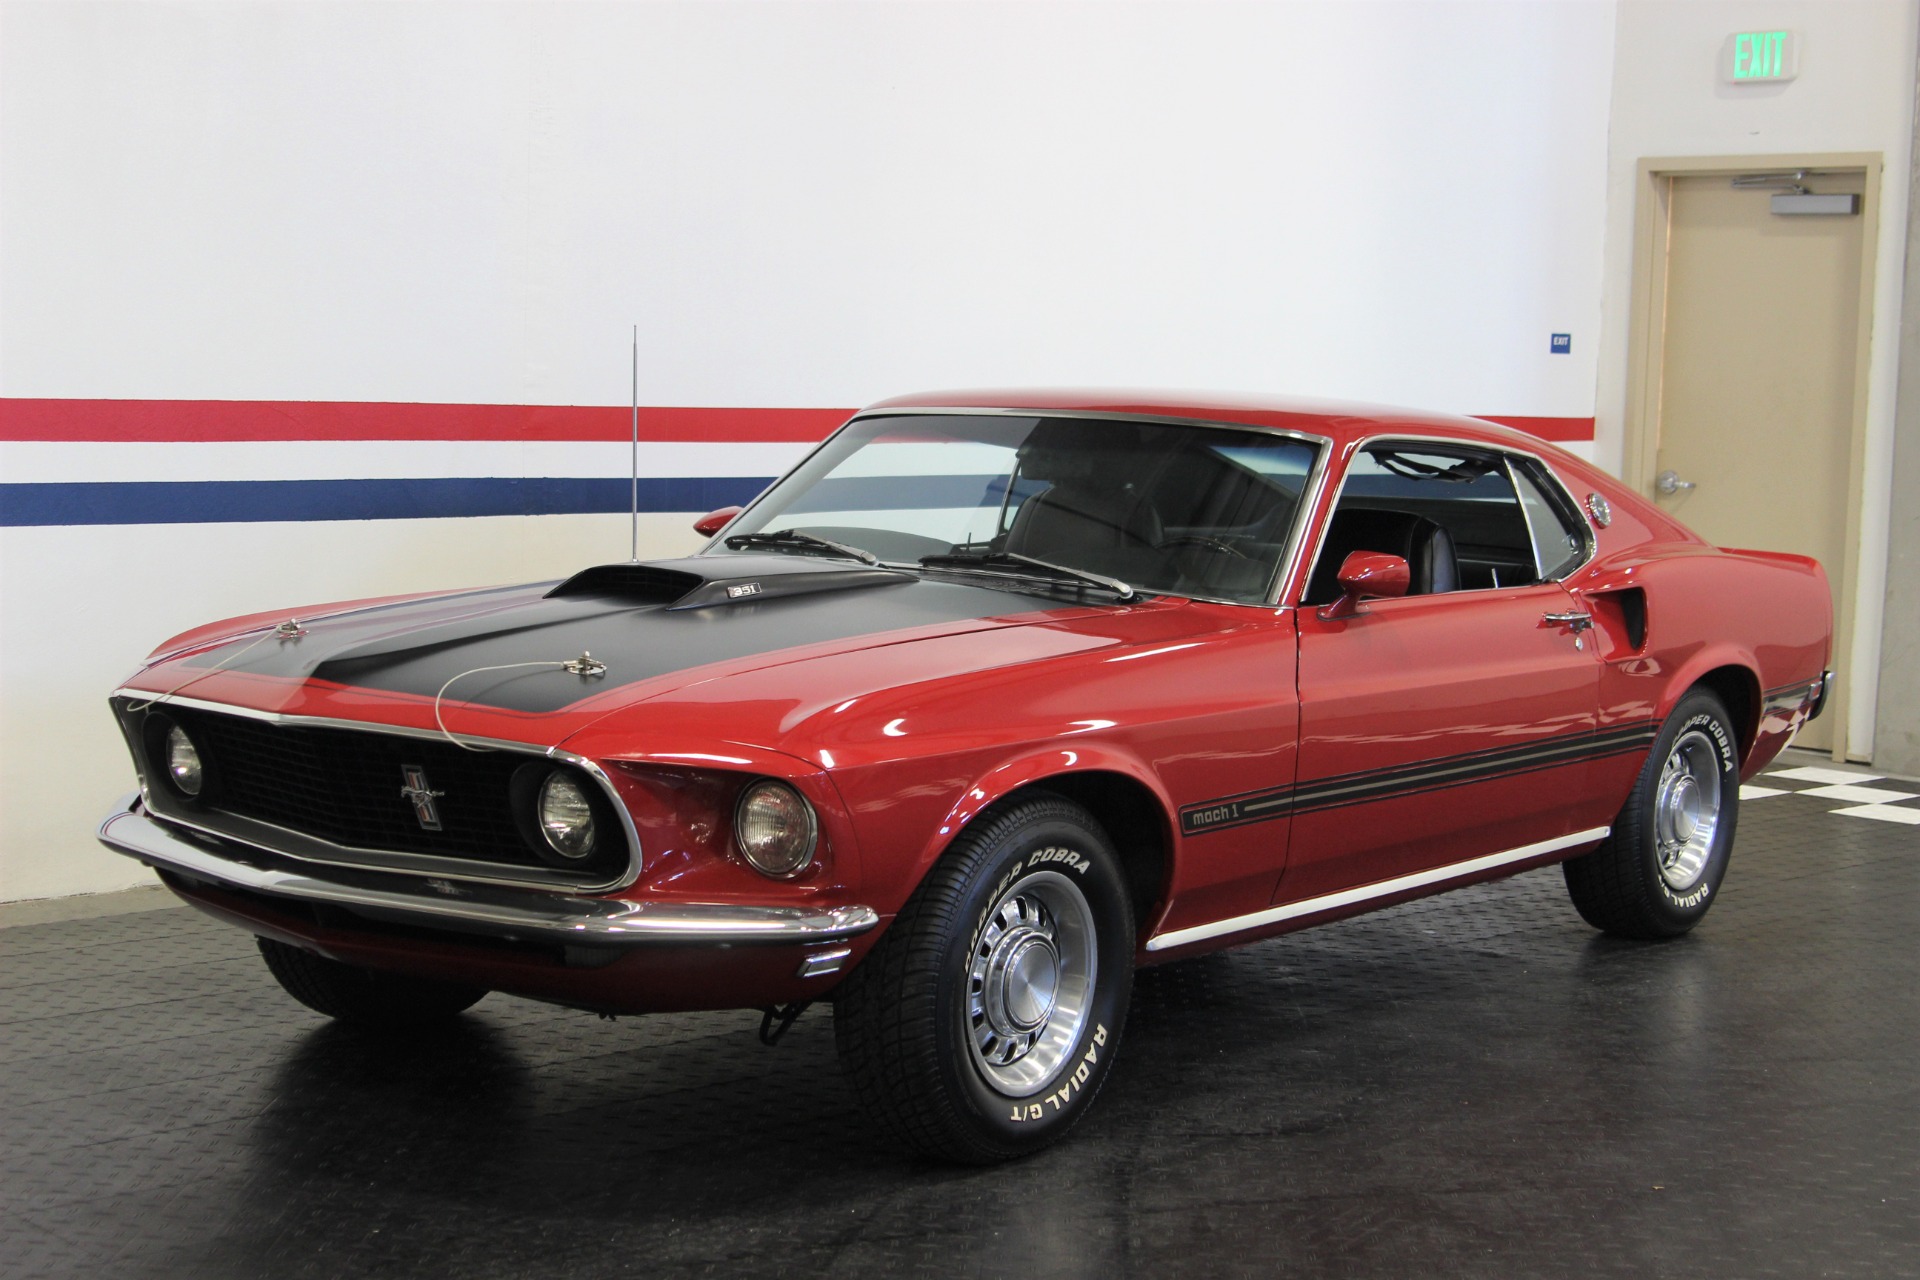 1969 Ford Mustang Mach 1 Stock # 19017 for sale near San Ramon, CA | CA ...